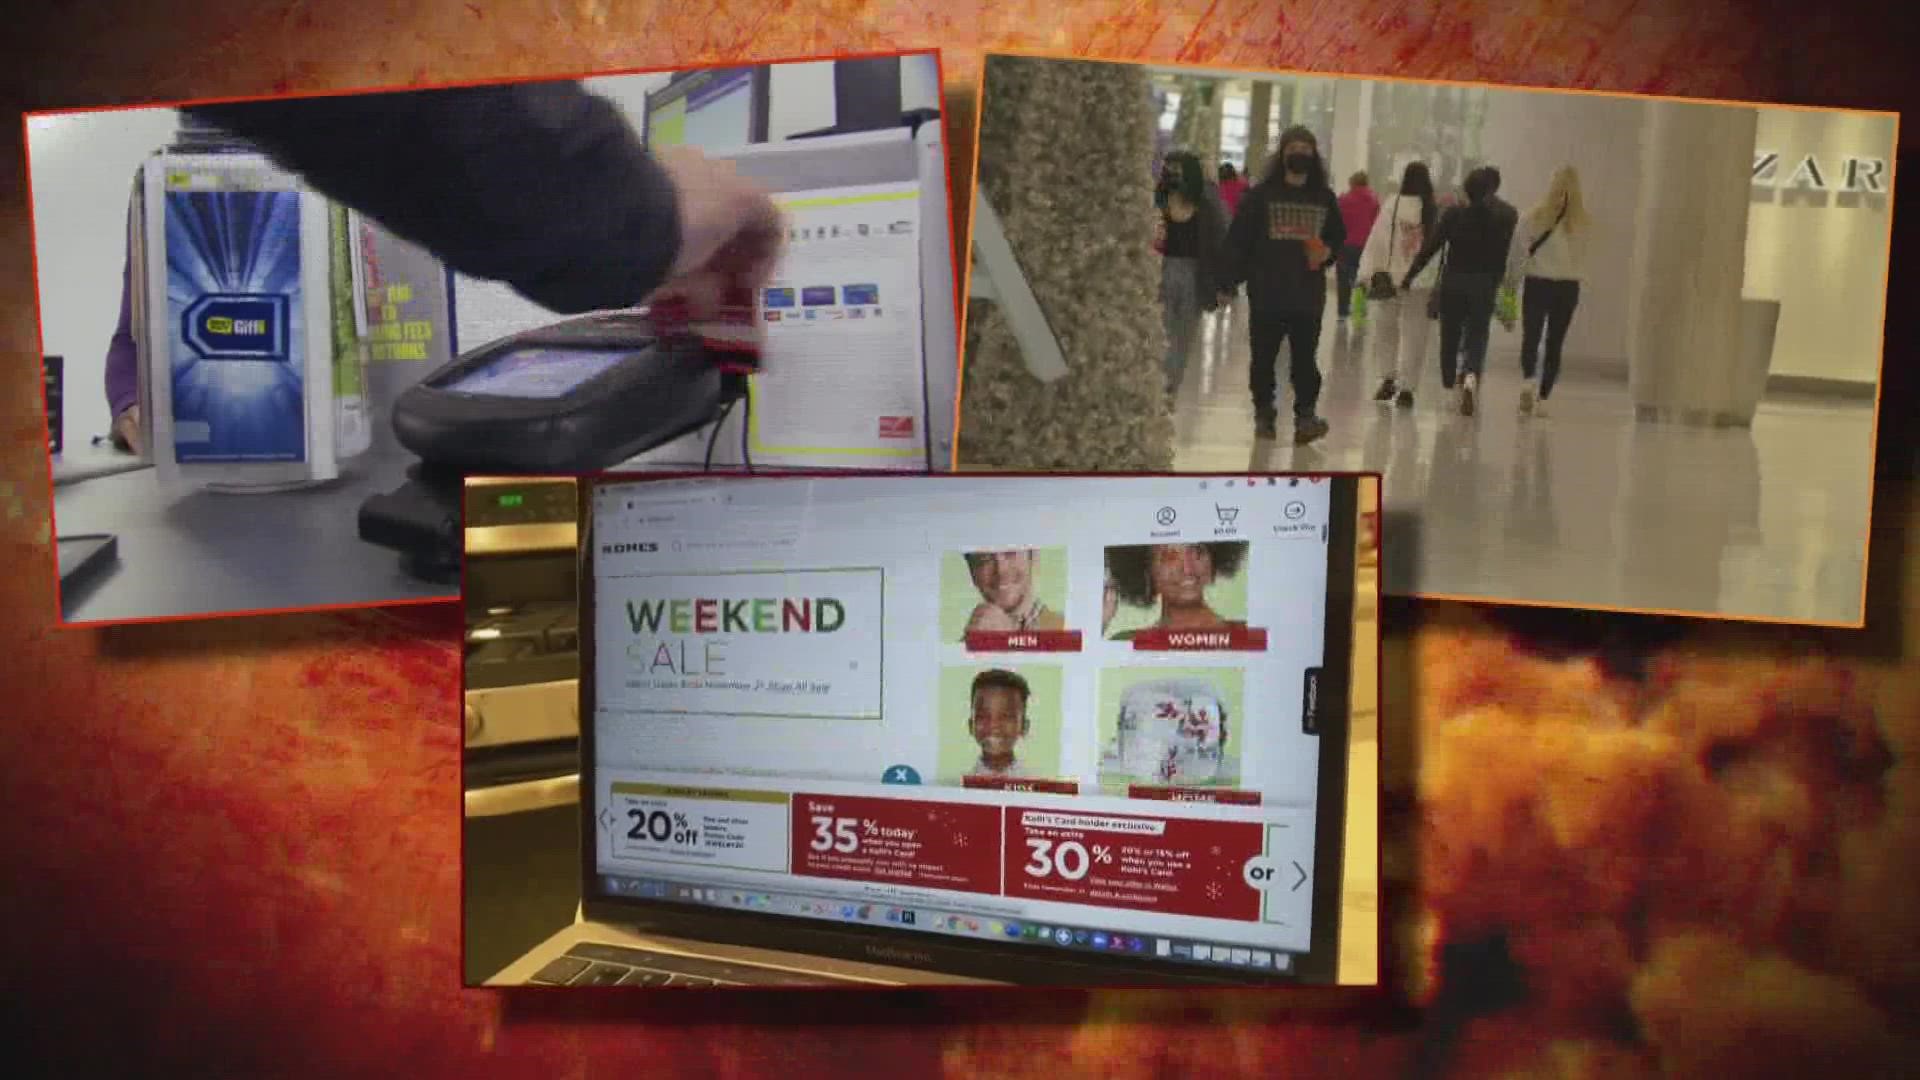 The holiday season has officially kicked off. Shoppers around the country are taking advantage of Black Friday deals.